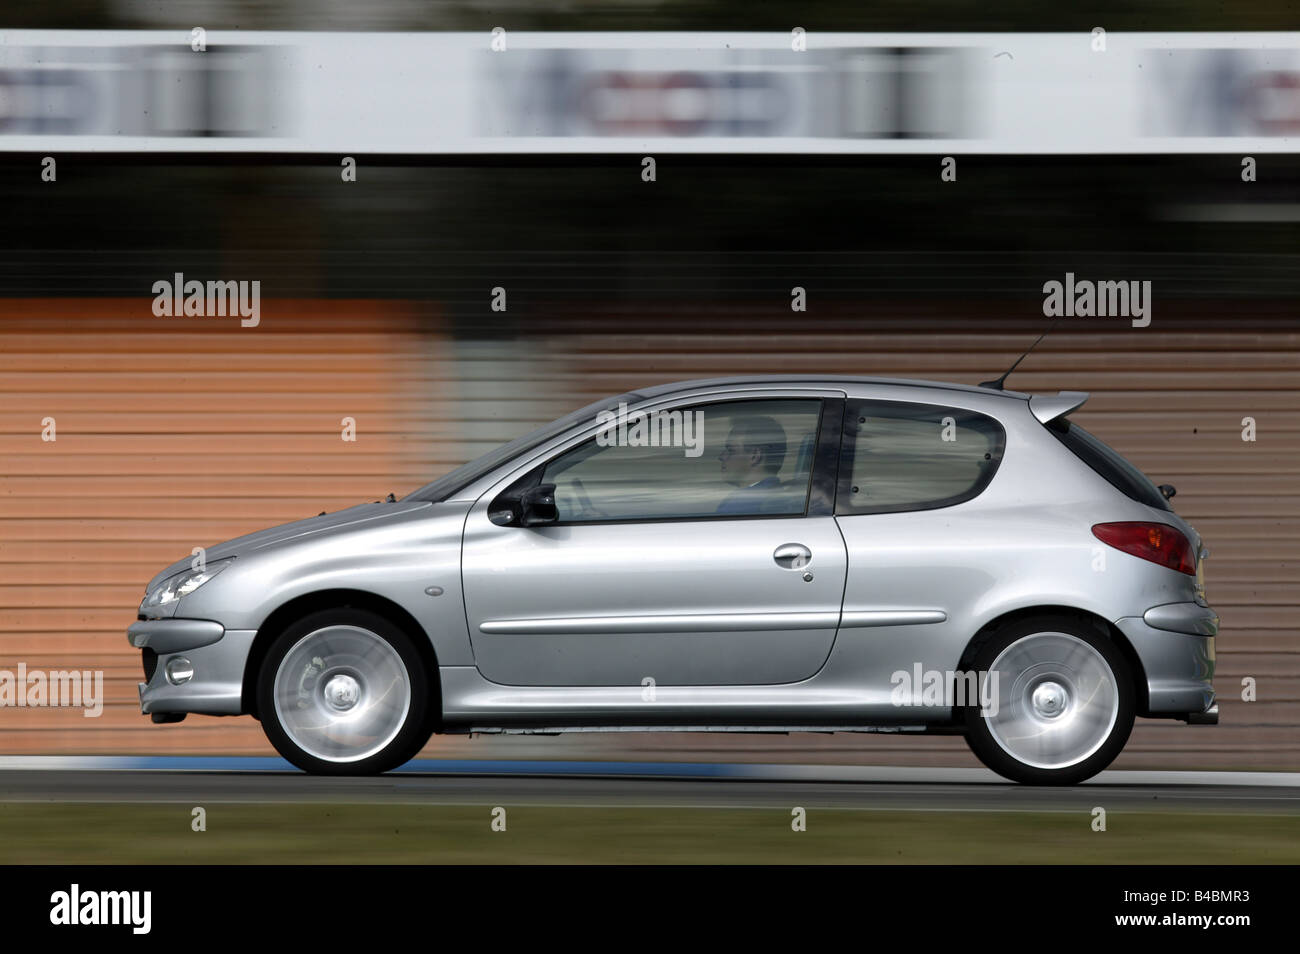 Car, Peugeot 206 RC, Limousine, small approx., model year 2003-, silver, driving, side view, Test track Stock Photo